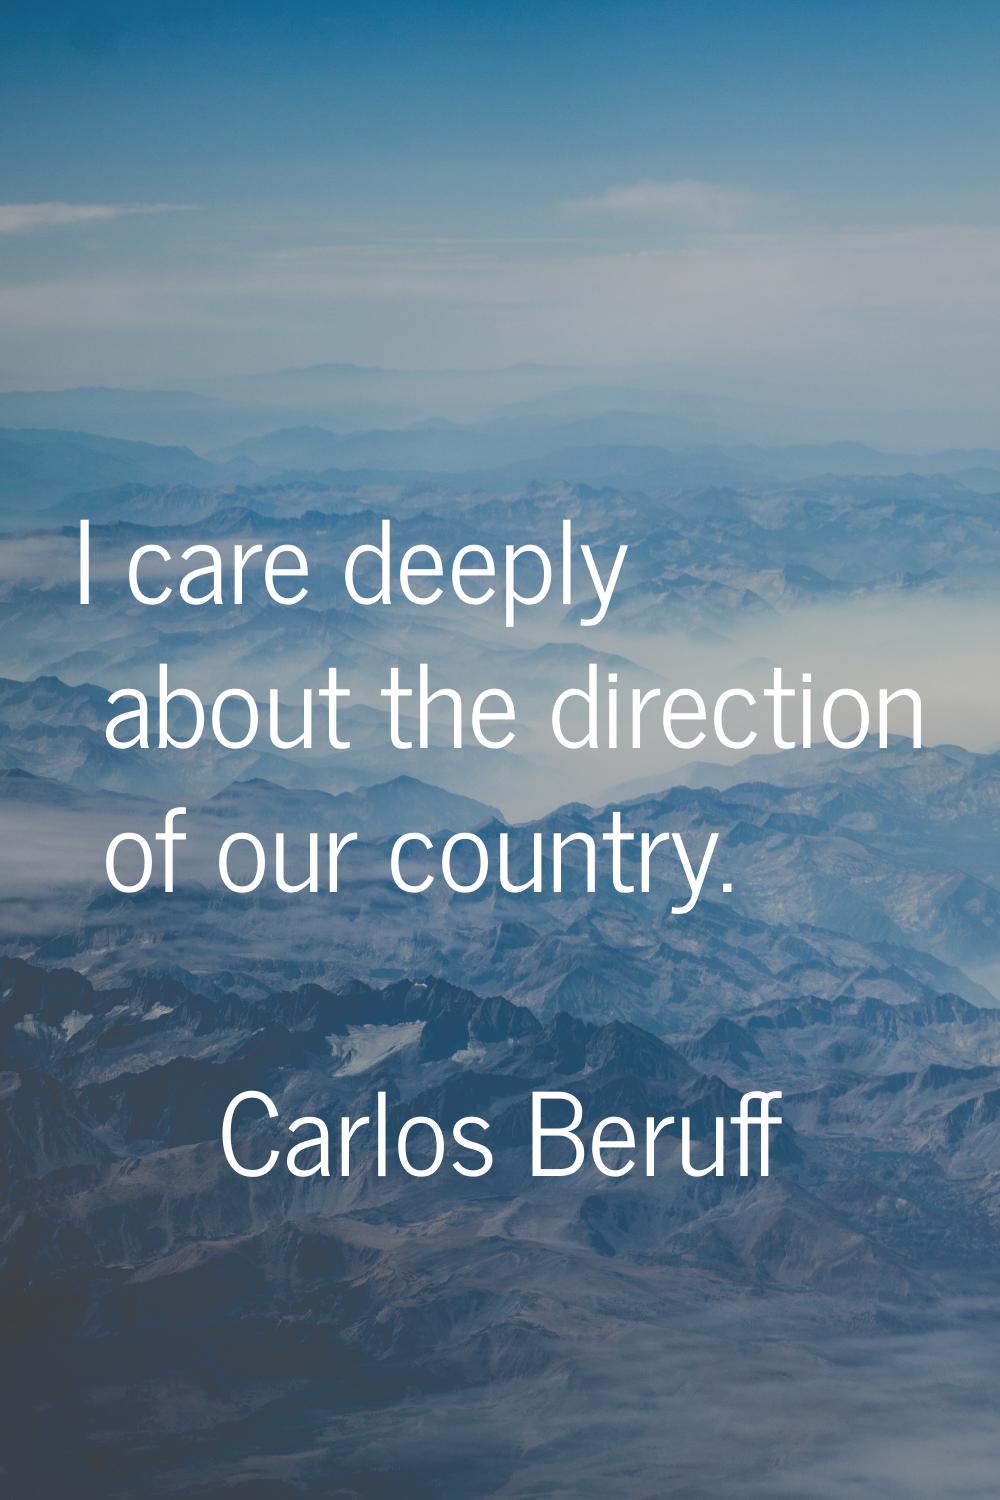 I care deeply about the direction of our country.